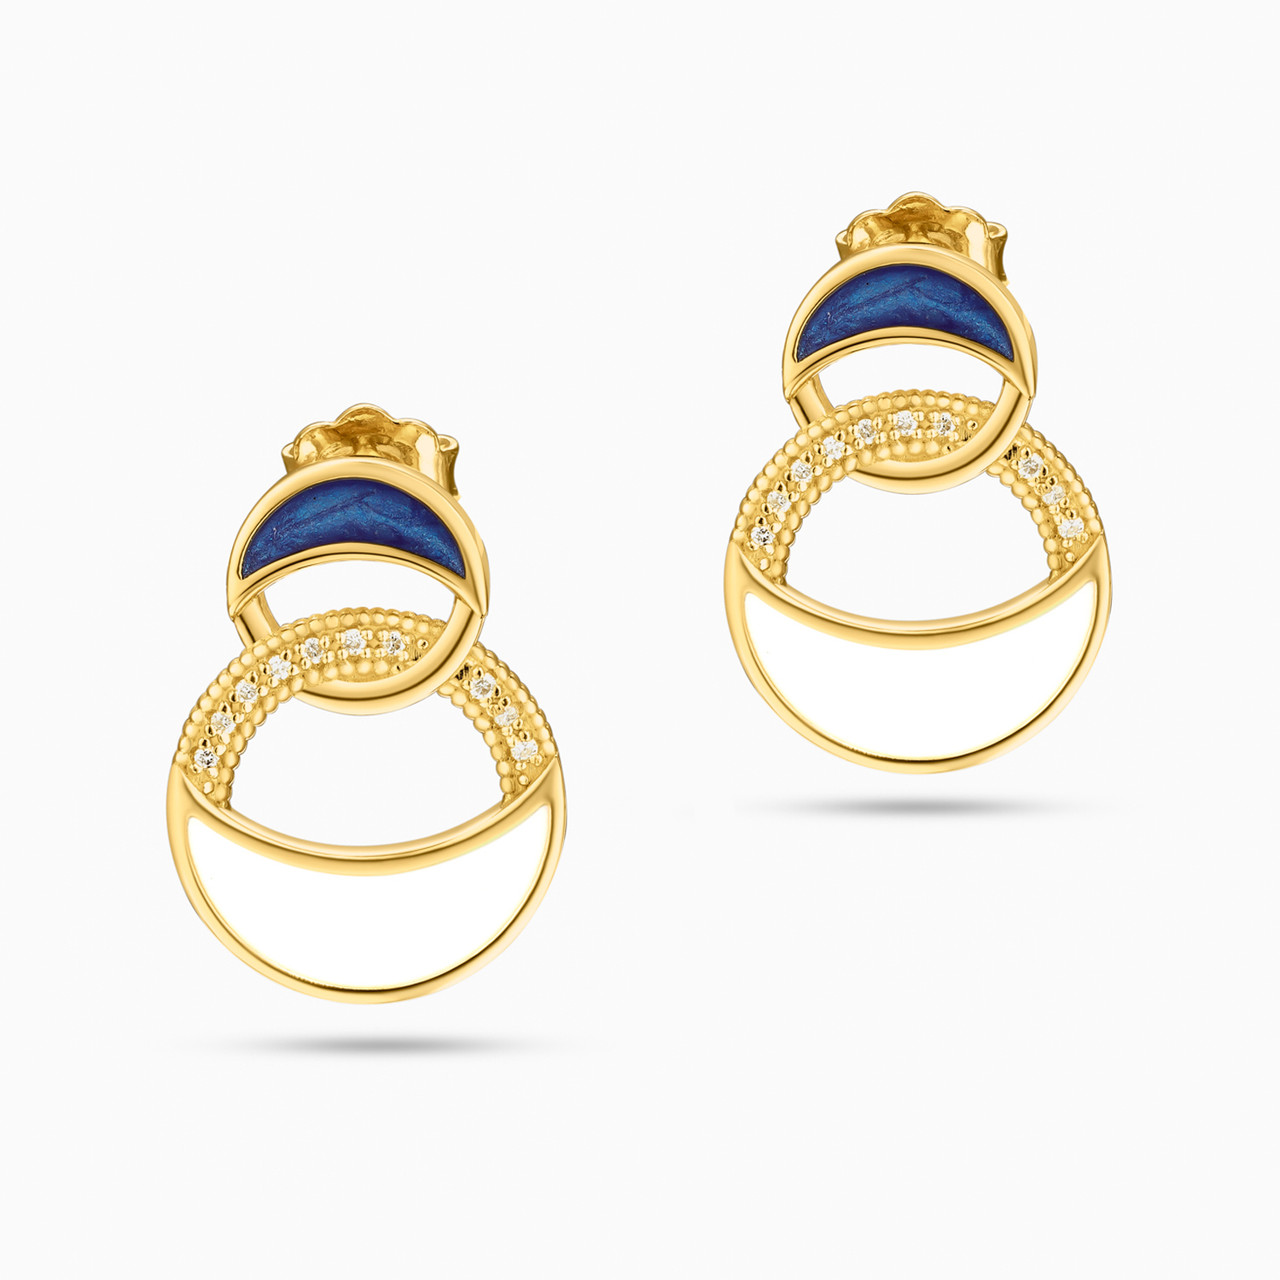 Interlocked Circles Shaped Colored Stones Stud Earrings in 18K Gold